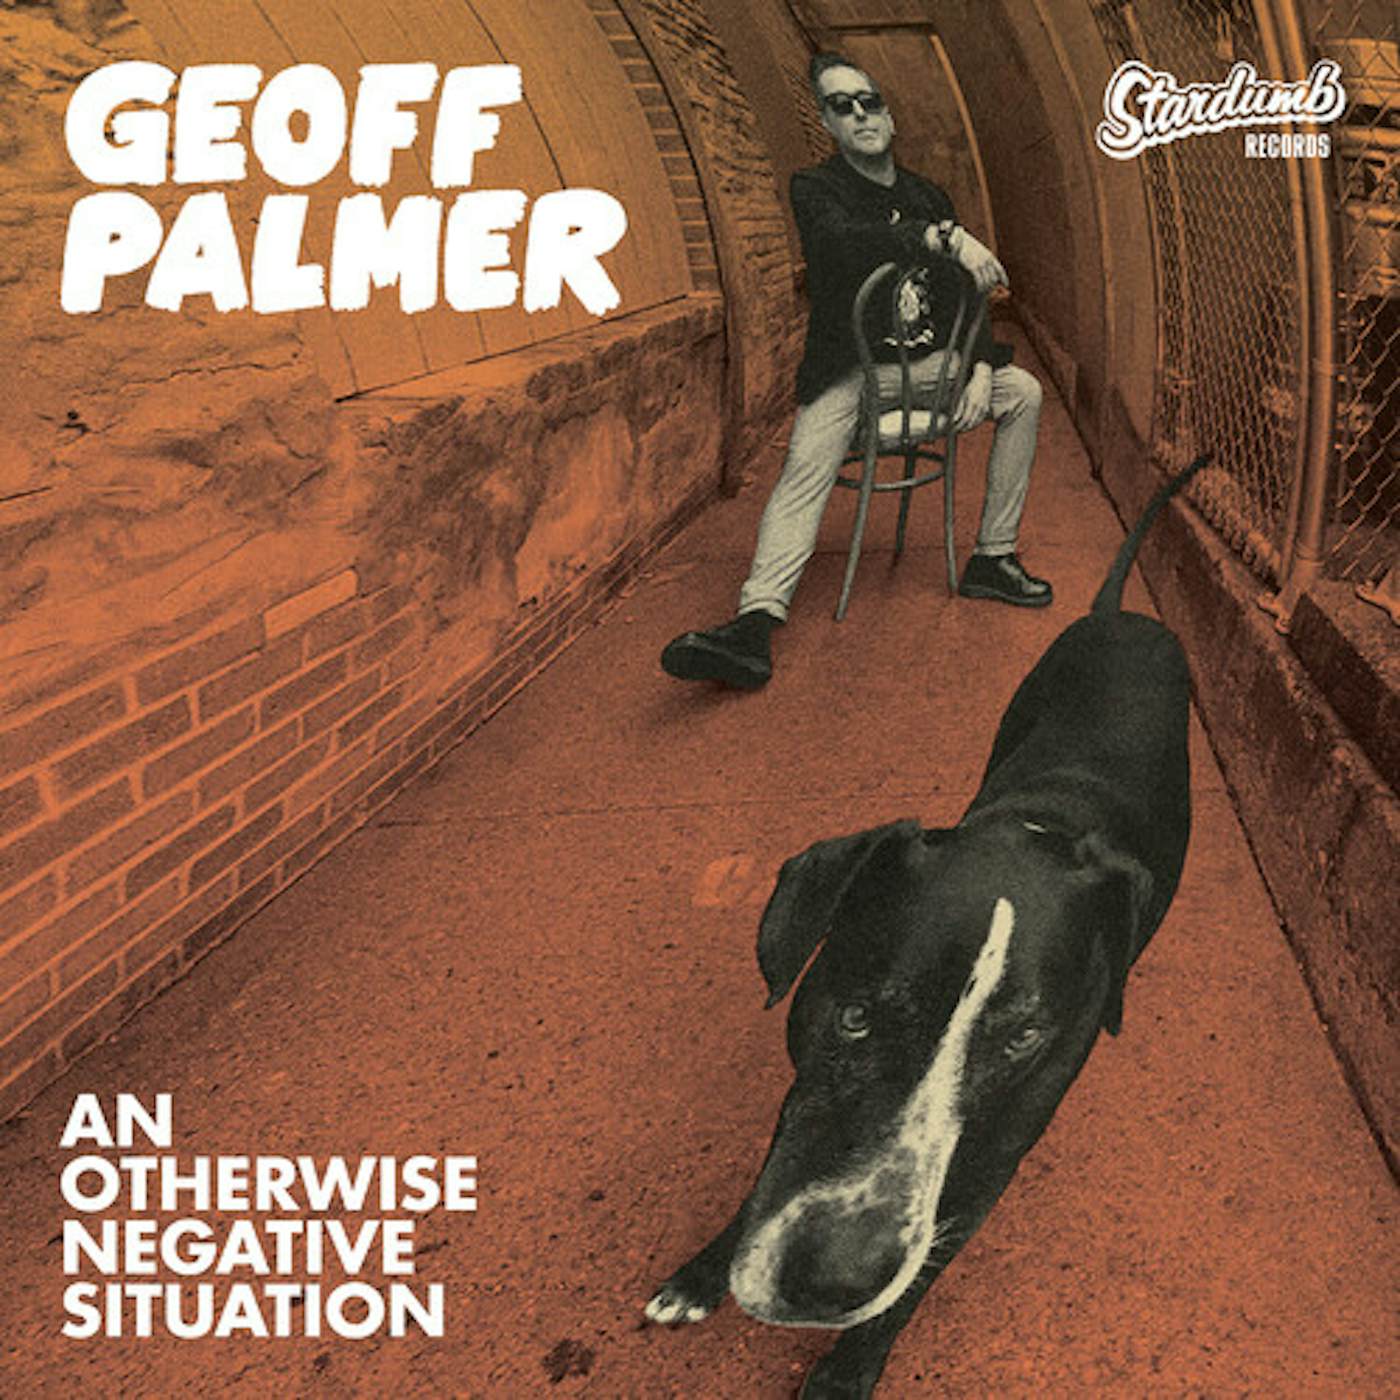 Geoff Palmer AN OTHERWISE NEGATIVE SITUATION Vinyl Record